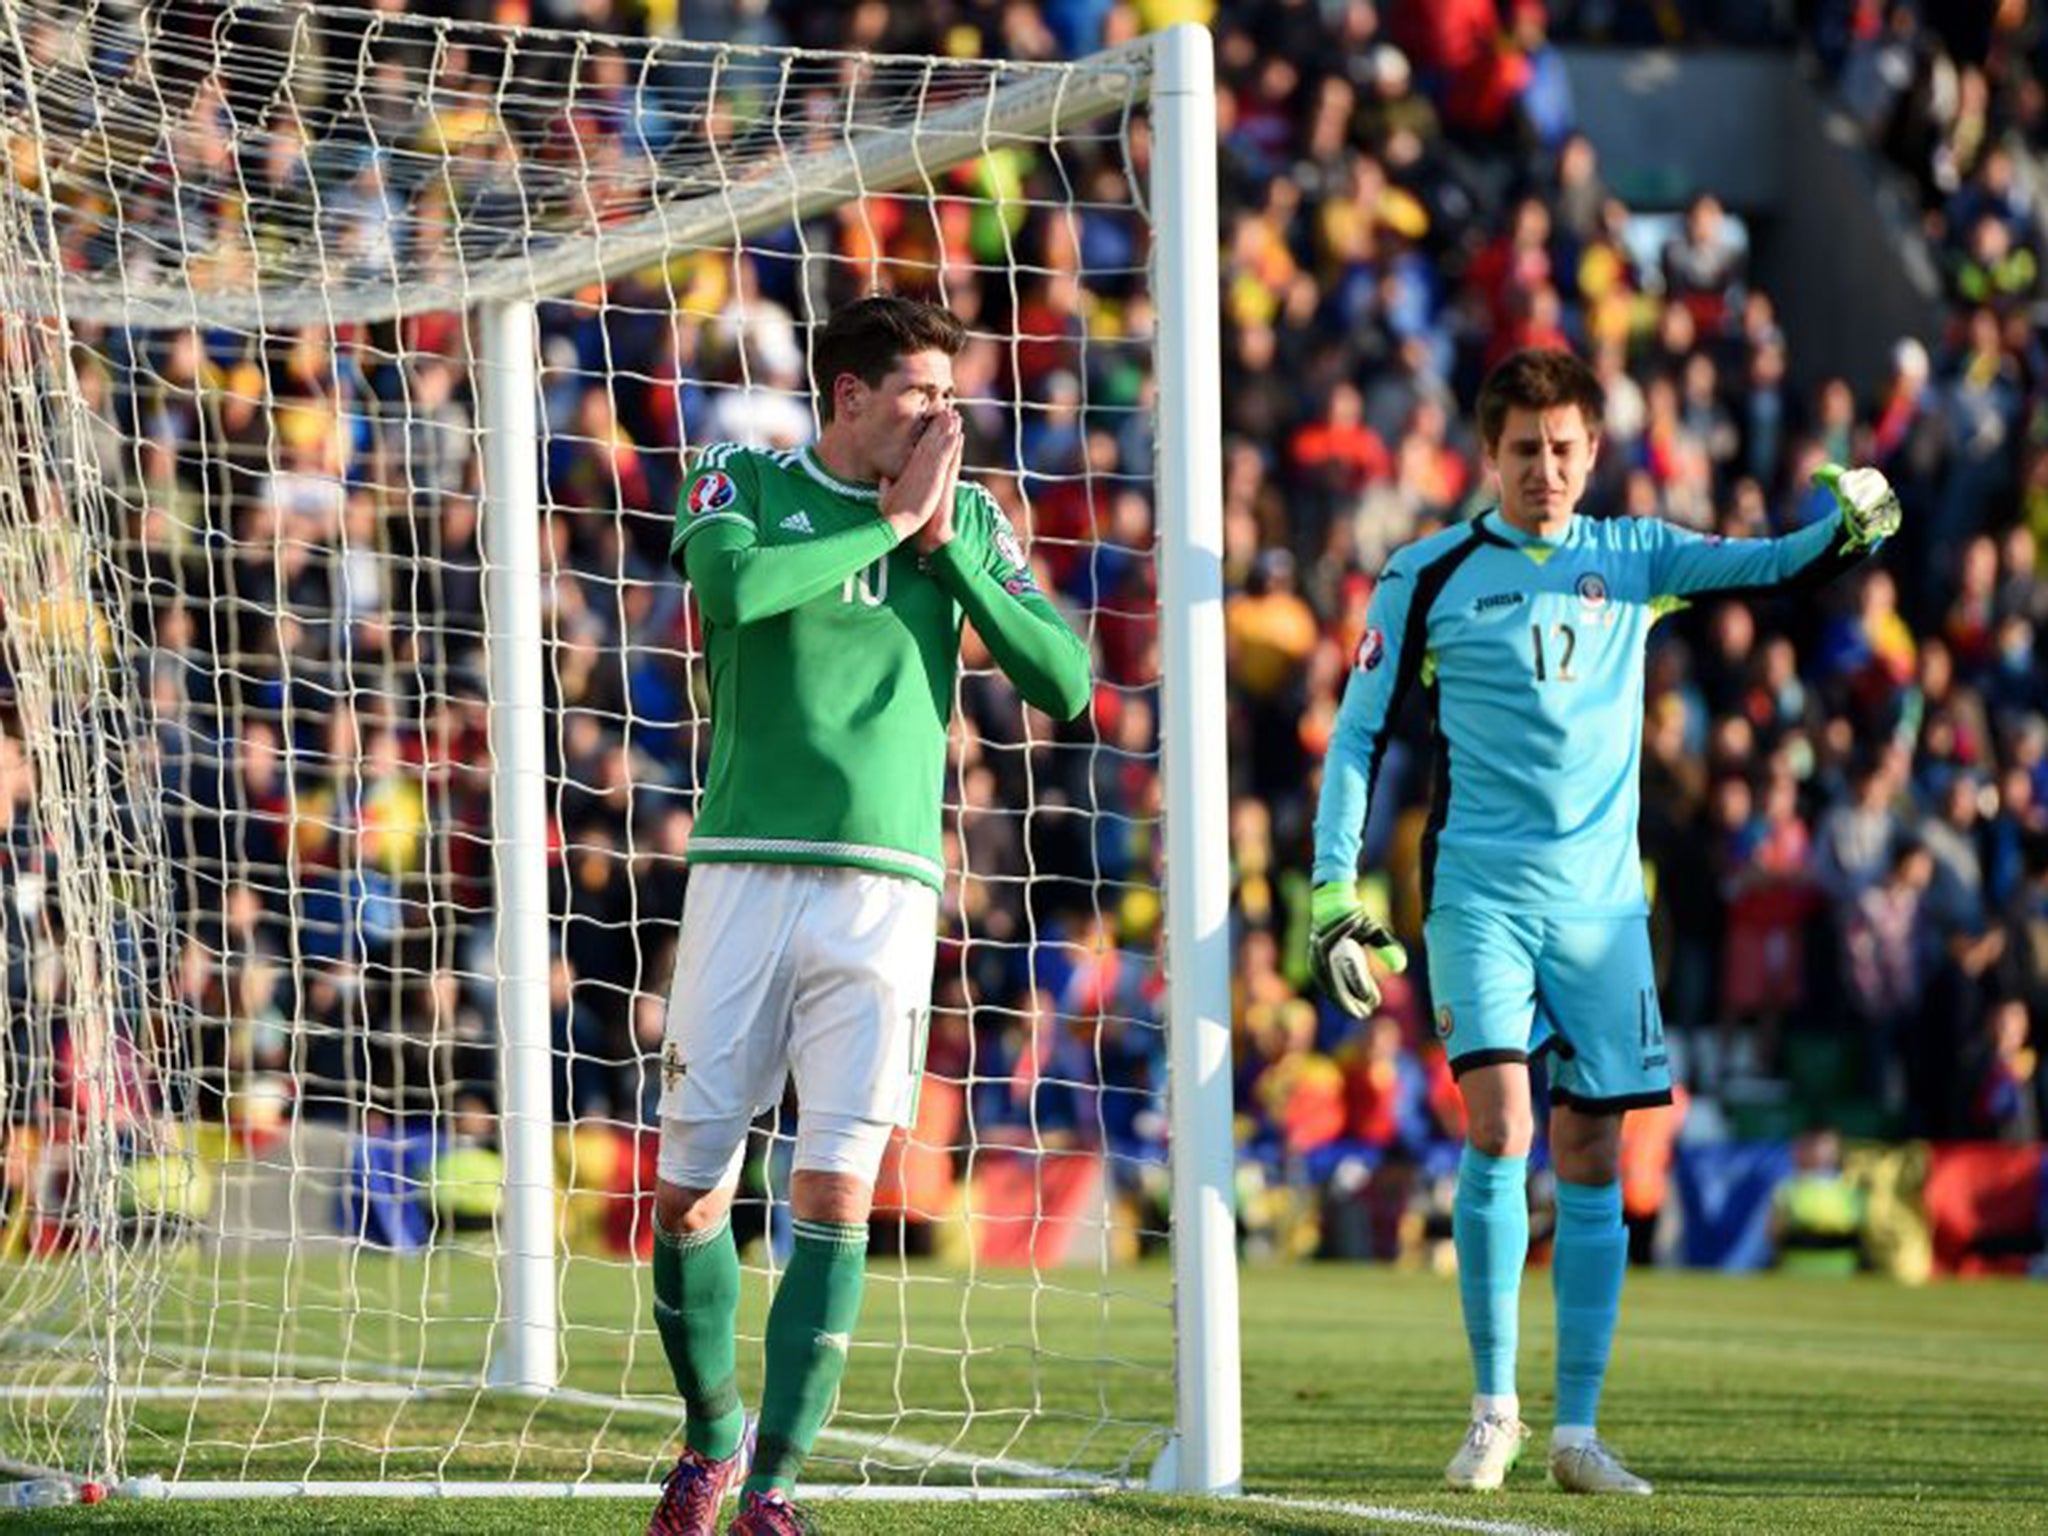 Northern Ireland's Kyle Lafferty missed a golden chance in the 83rd-minute